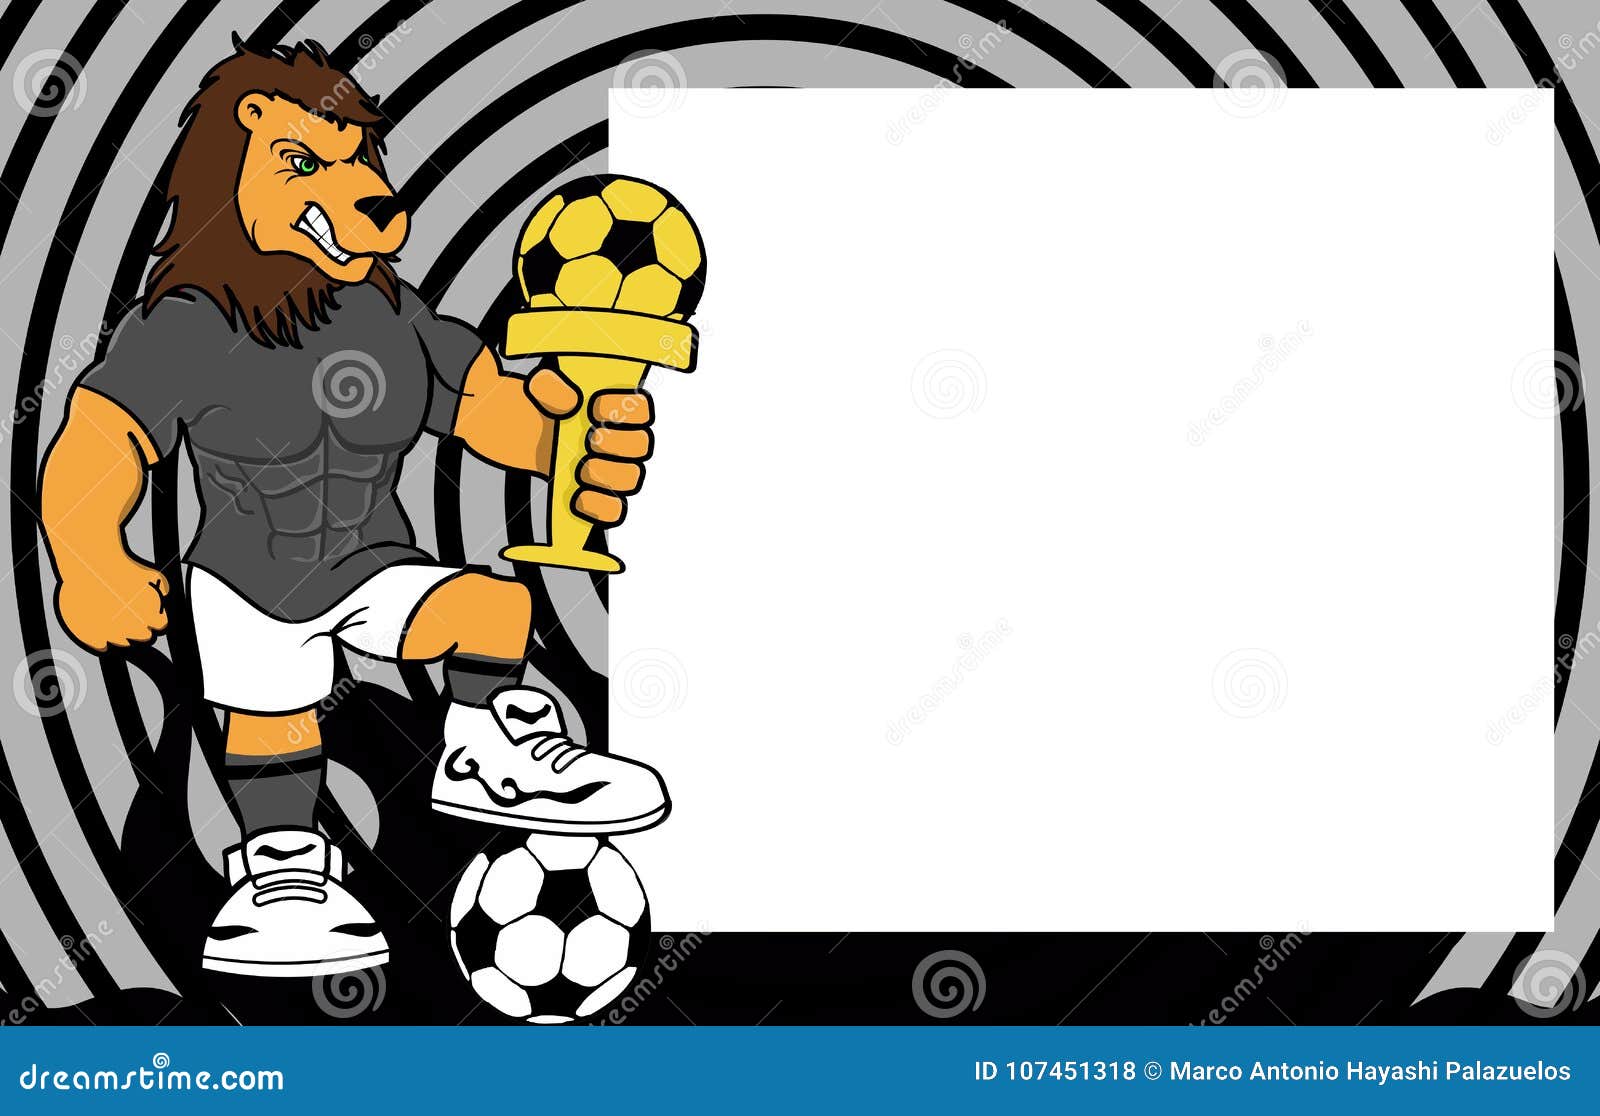 strong sporty lion futbol soccer player cartoon picture frame background